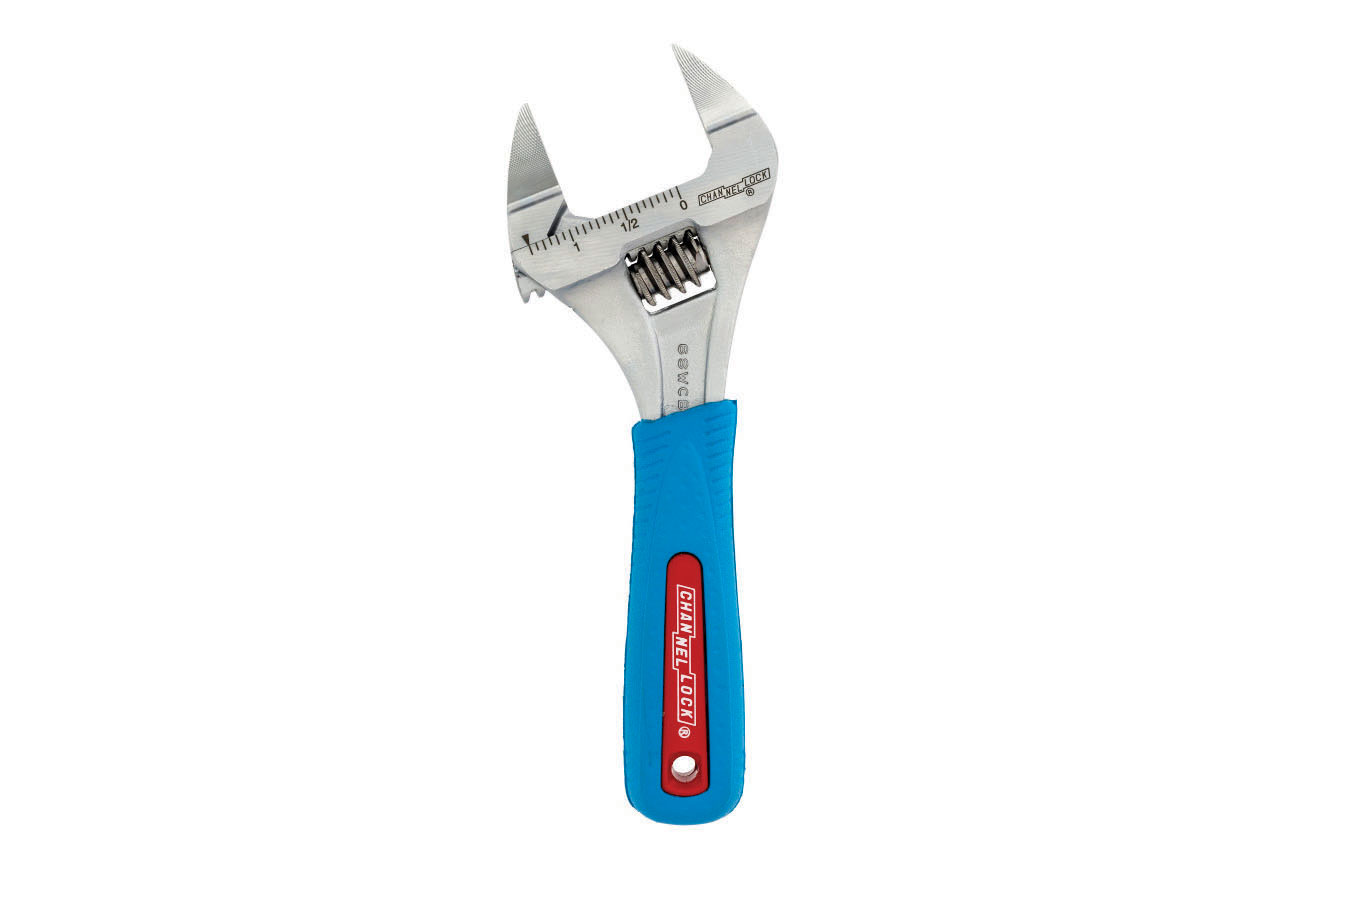 Channellock wrench